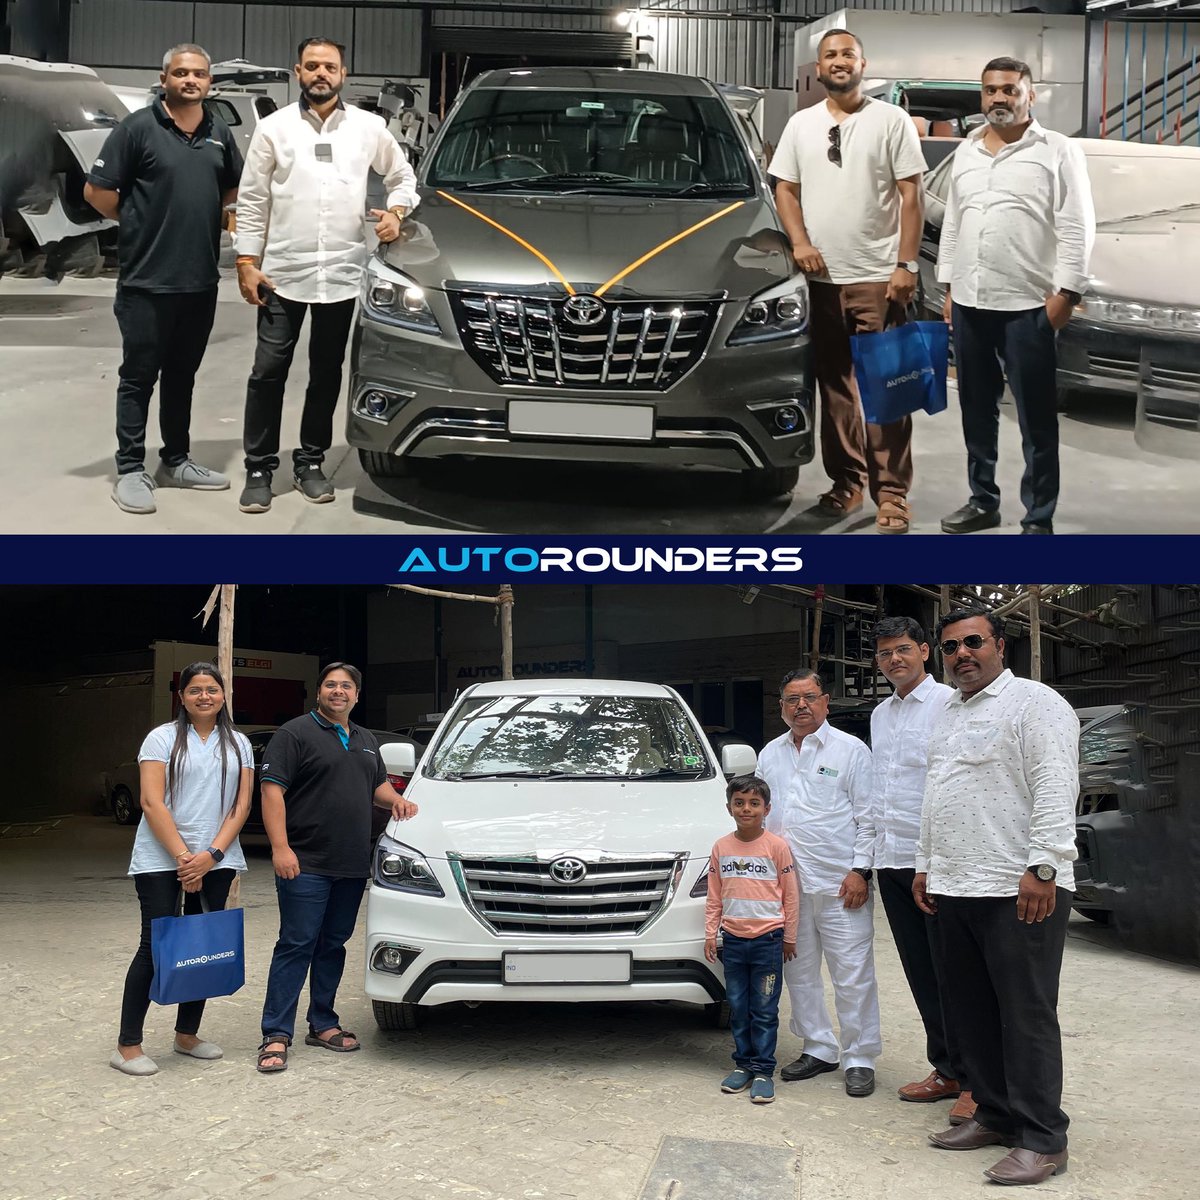 We make sure our customers are the Happiest!!
Autorounders delivery pictures are the proof. 💯🔥

#Autorounders #CarModification #CarPaint #PaintJob #CustomizedInterior #InteriorCustomization #CarCustomization #Mumbai #Pune #Hyderabad #Thane #ThaneGBRoad